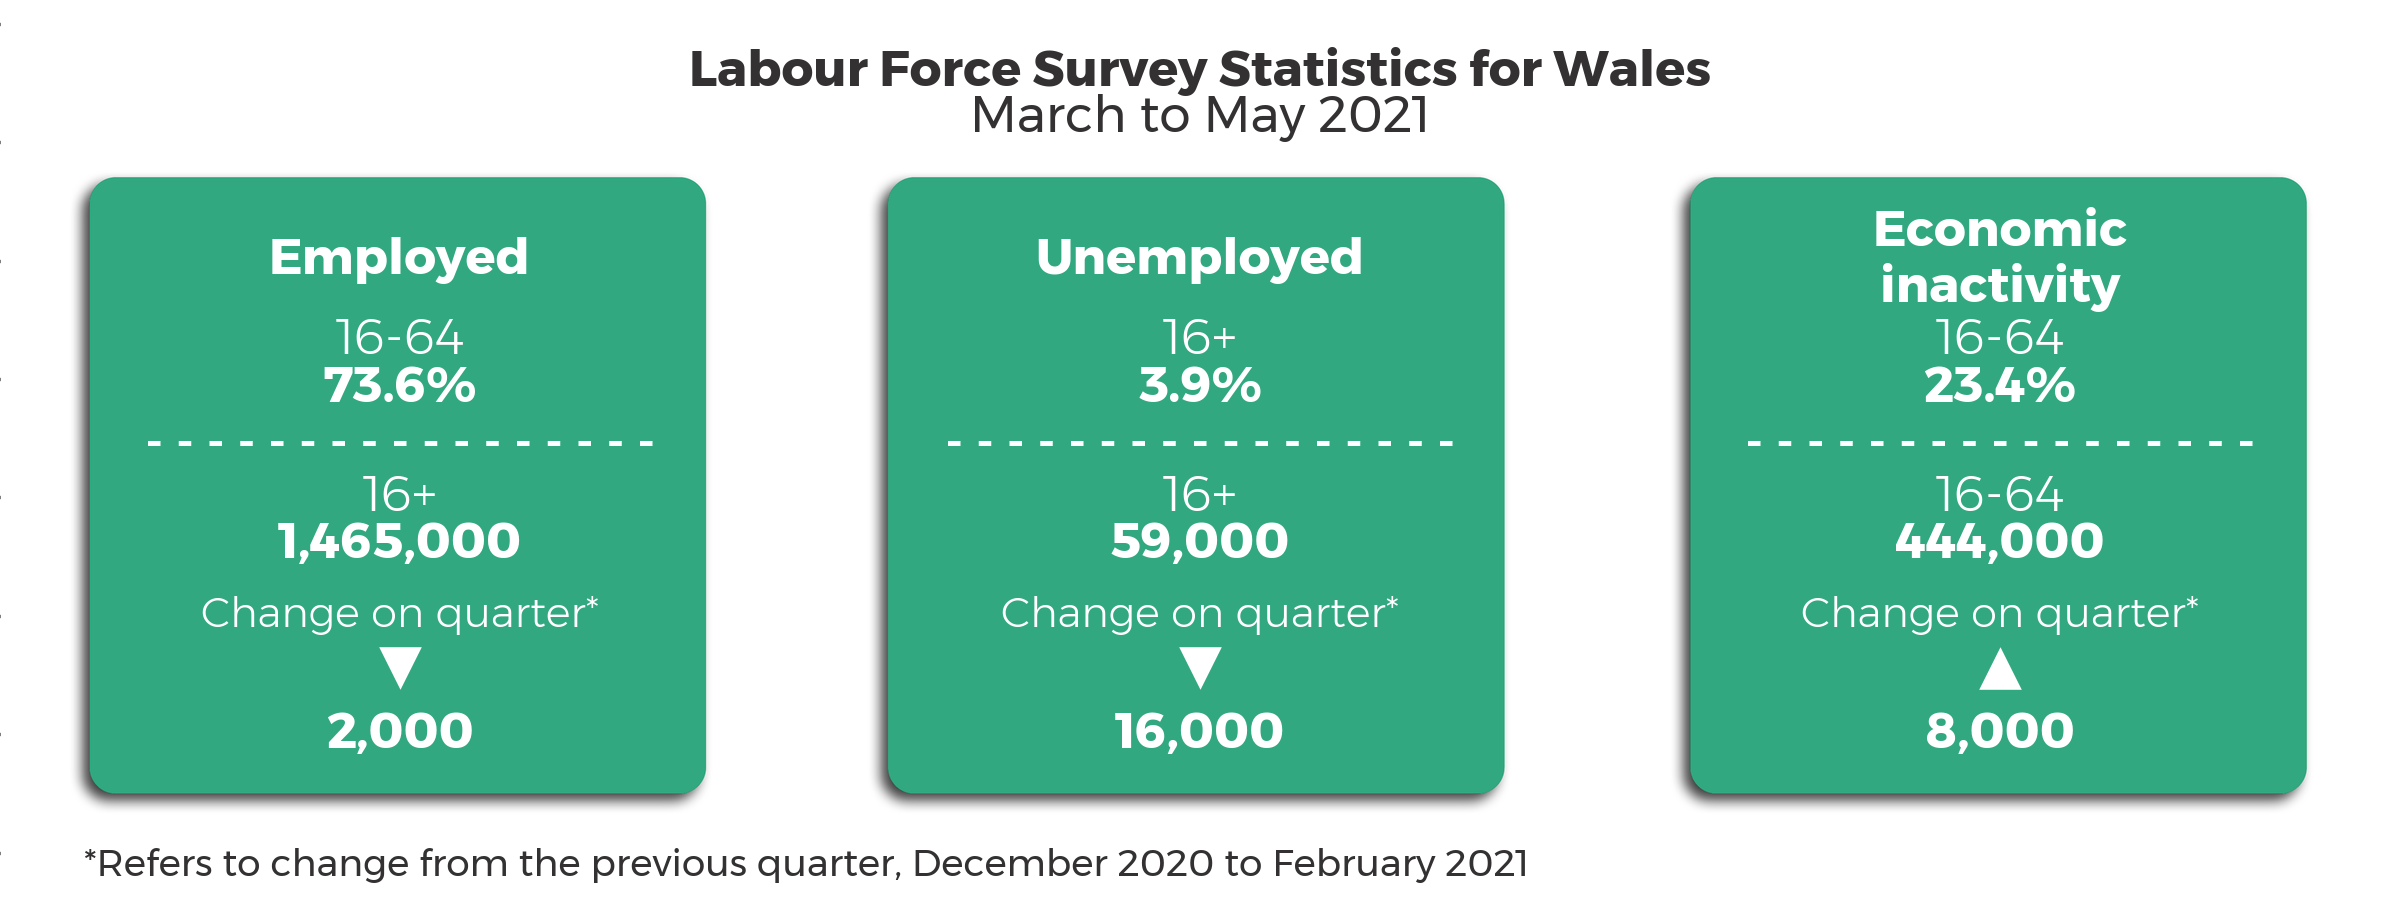 Headline statistics March 2021 to May 2021 compared to the previous quarter December 2020 to February 2021. The 16+ unemployment rate is 3.9% with 59,000 people unemployed, a decrease of 16,000 from the previous quarter. The 16-64 employment rate is 73.6%. 1,465,000 people aged 16+ employed, a decrease of 2,000 from the previous quarter. The 16-64 economic inactivity rate is 23.4% with 444,000 people economically active, an increase of 78,000 on the previous quarter.